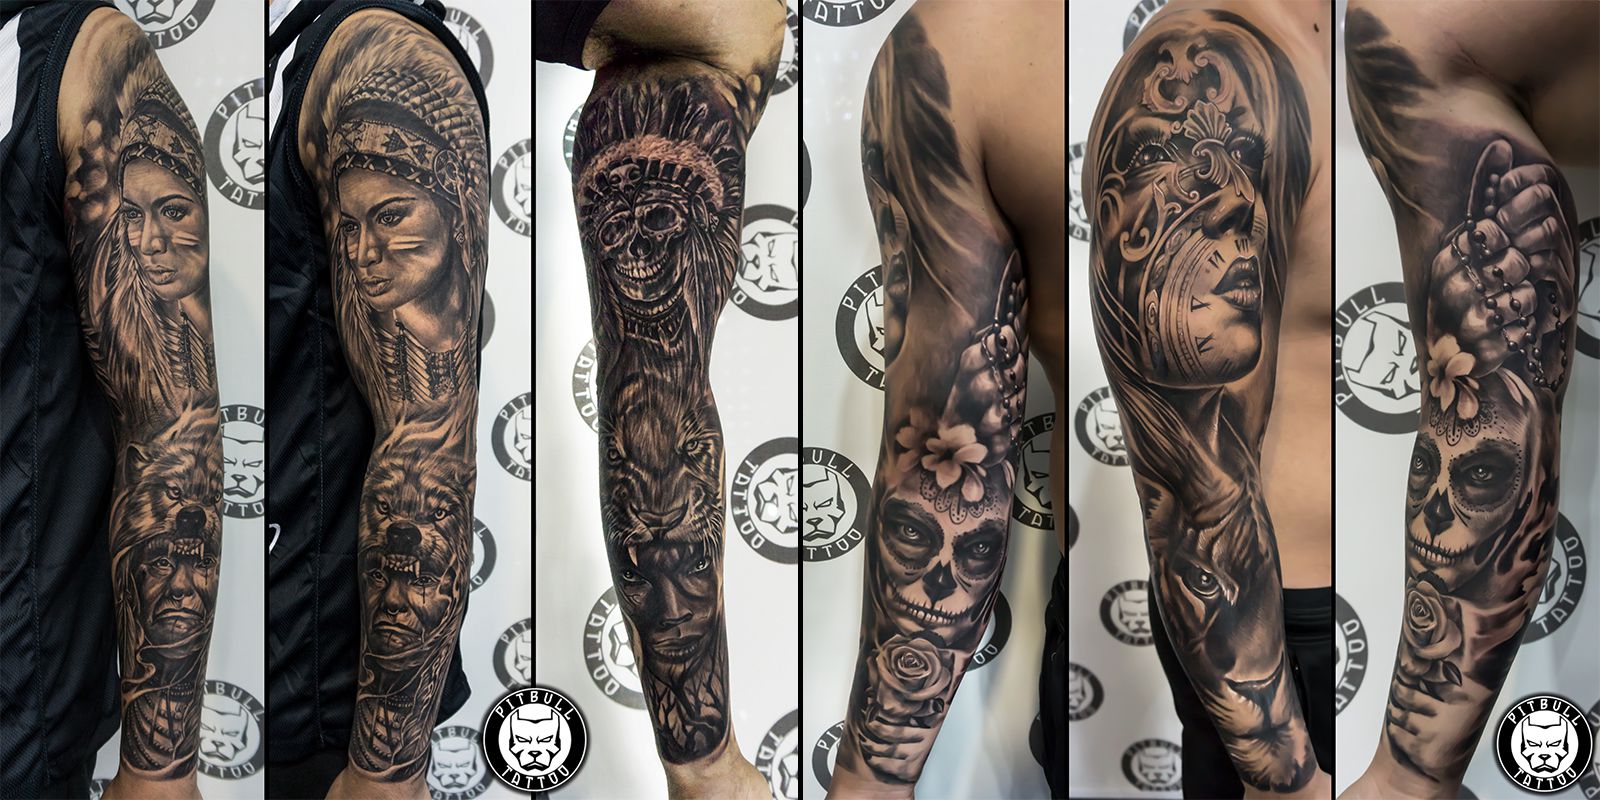 10 Amazing Reasons to Get Yourself a Black and Grey Tattoo